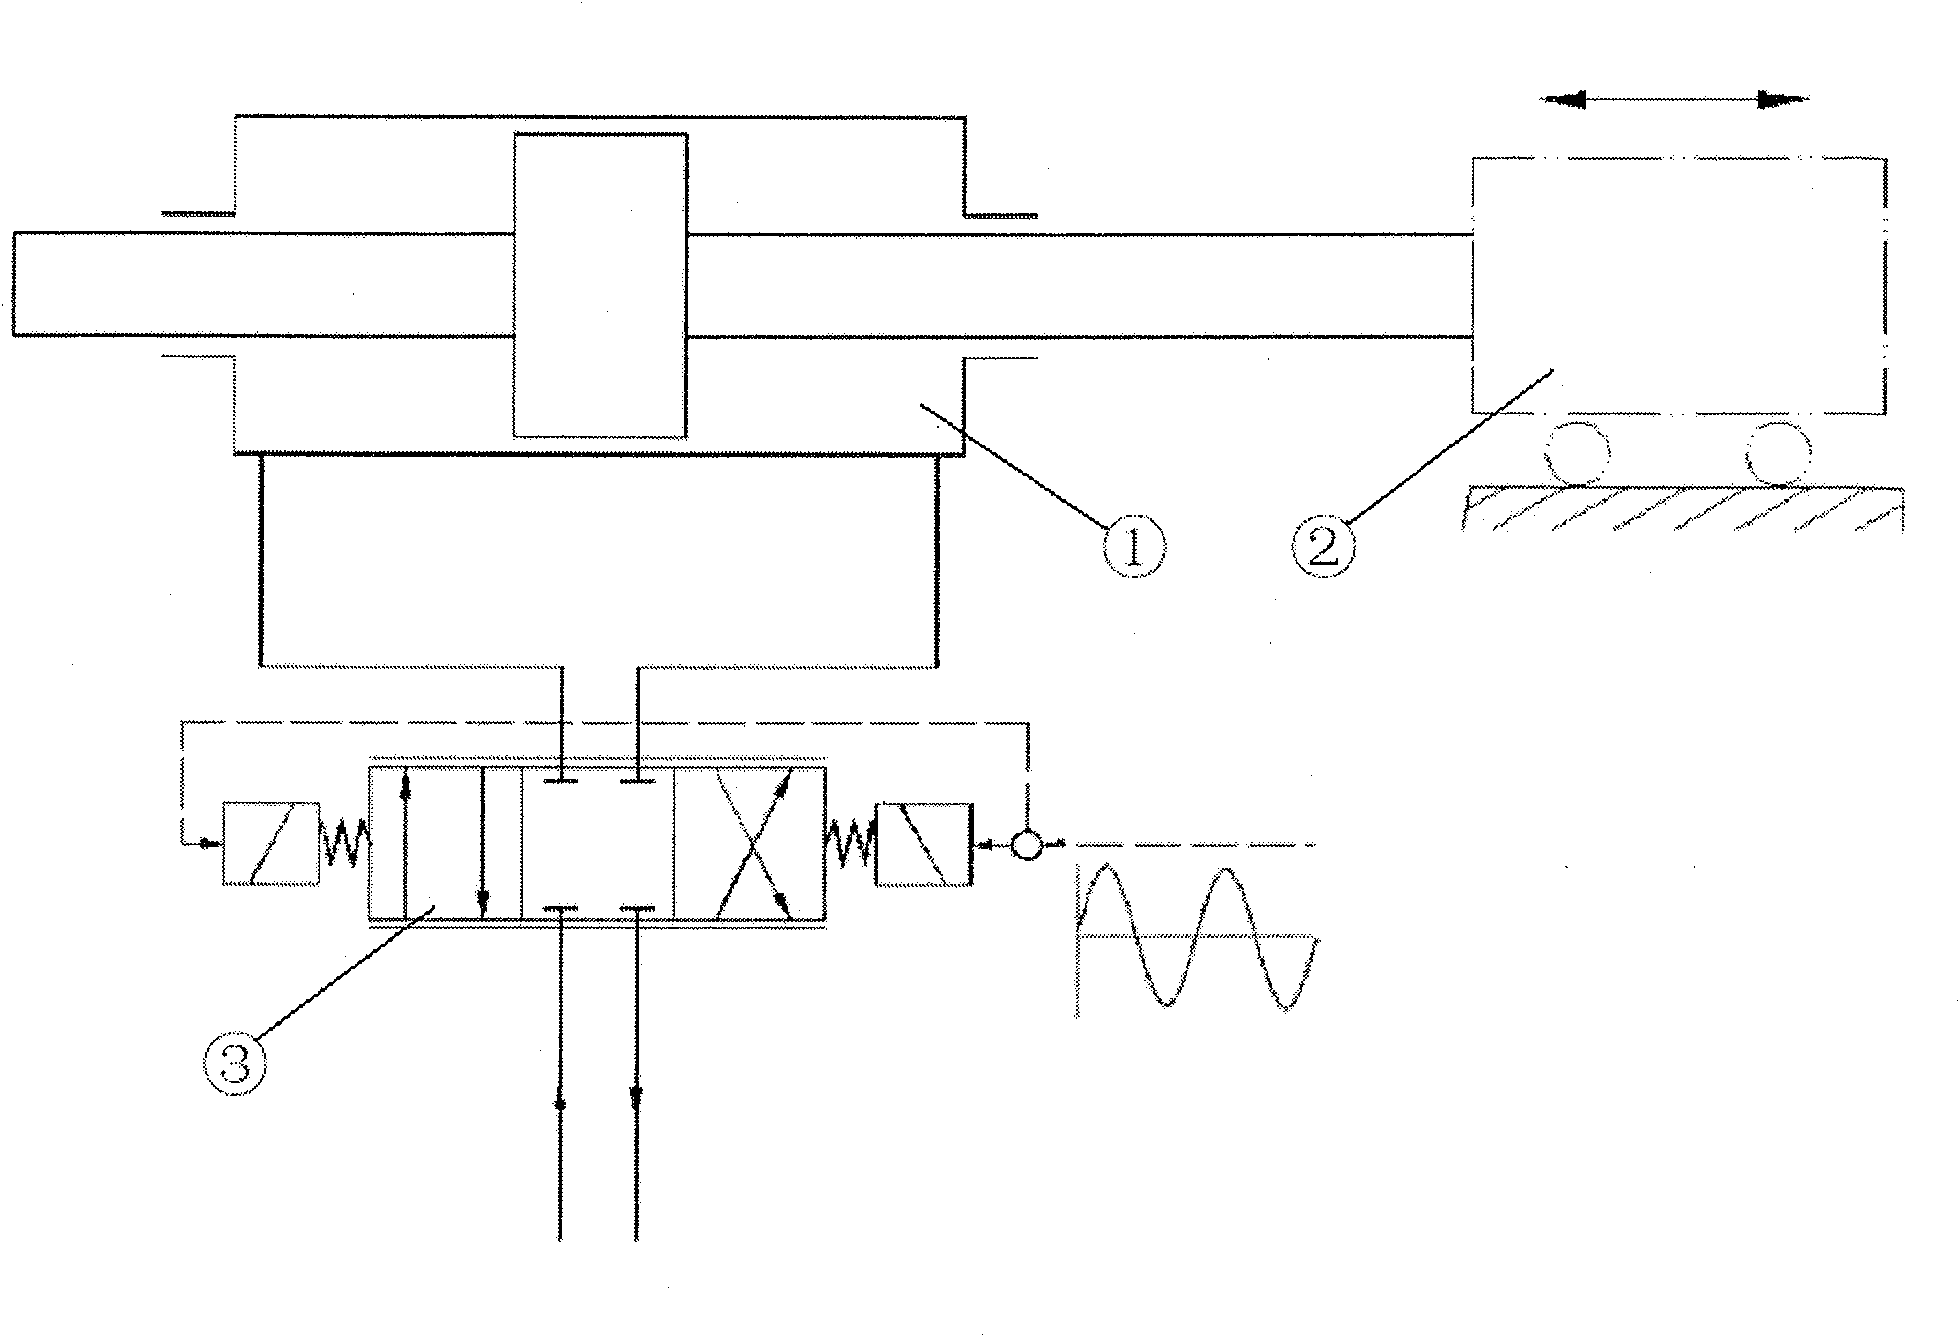 Electrohydraulic excitation controlling valve